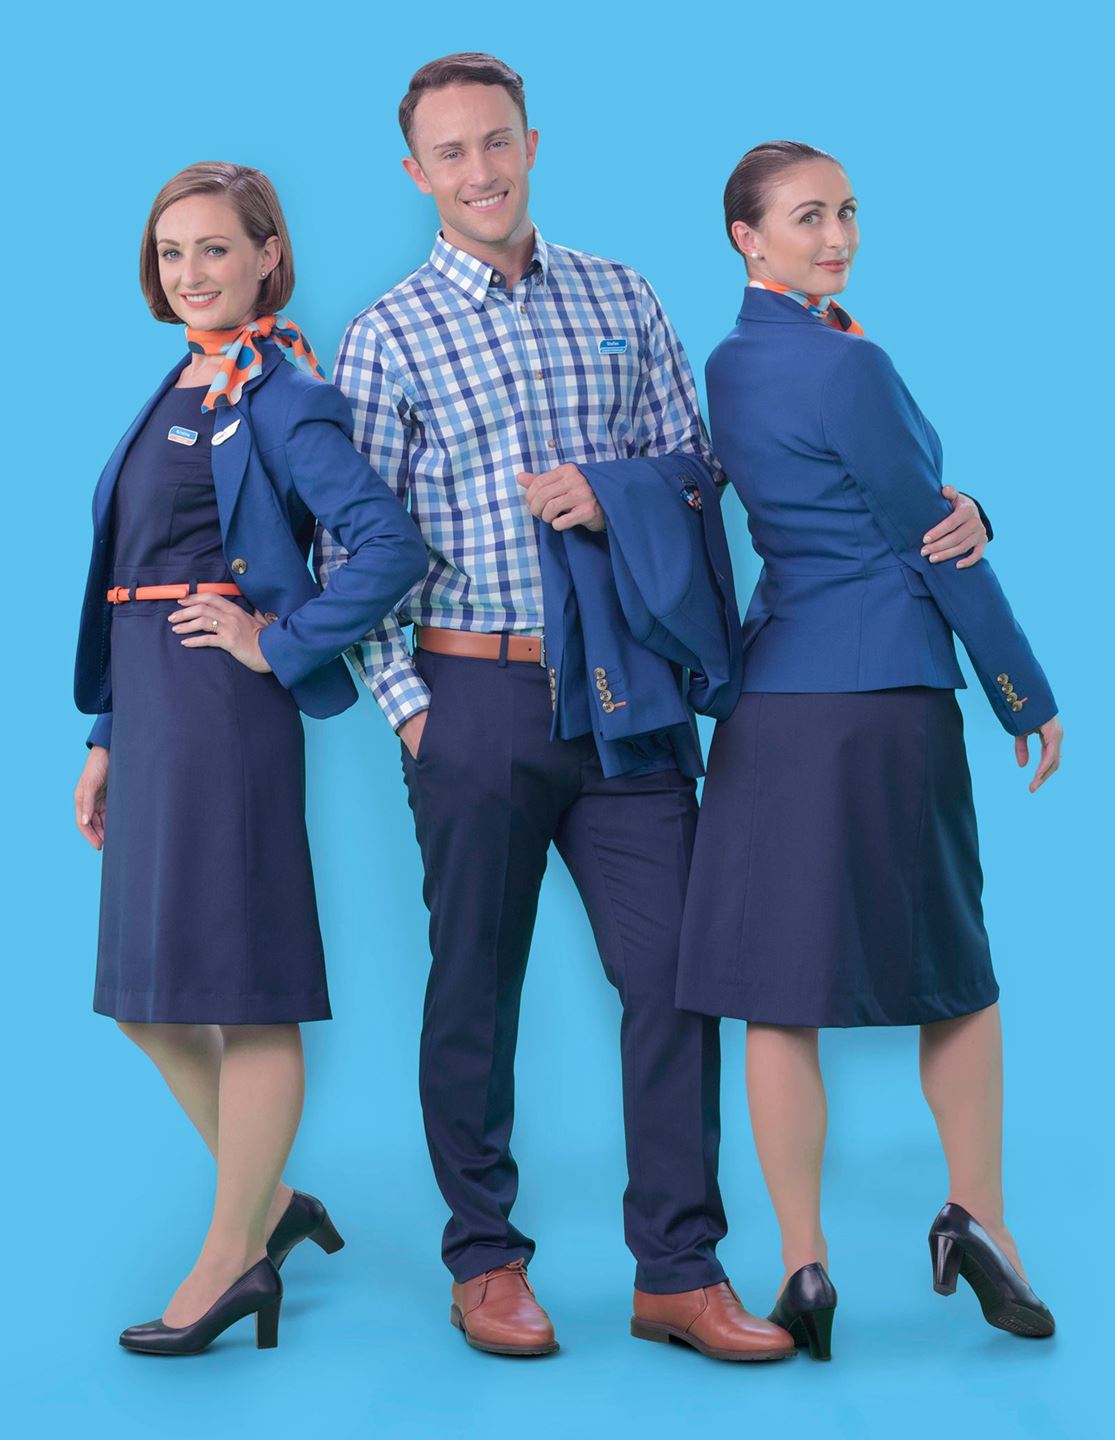 flydubai to roll out new uniform